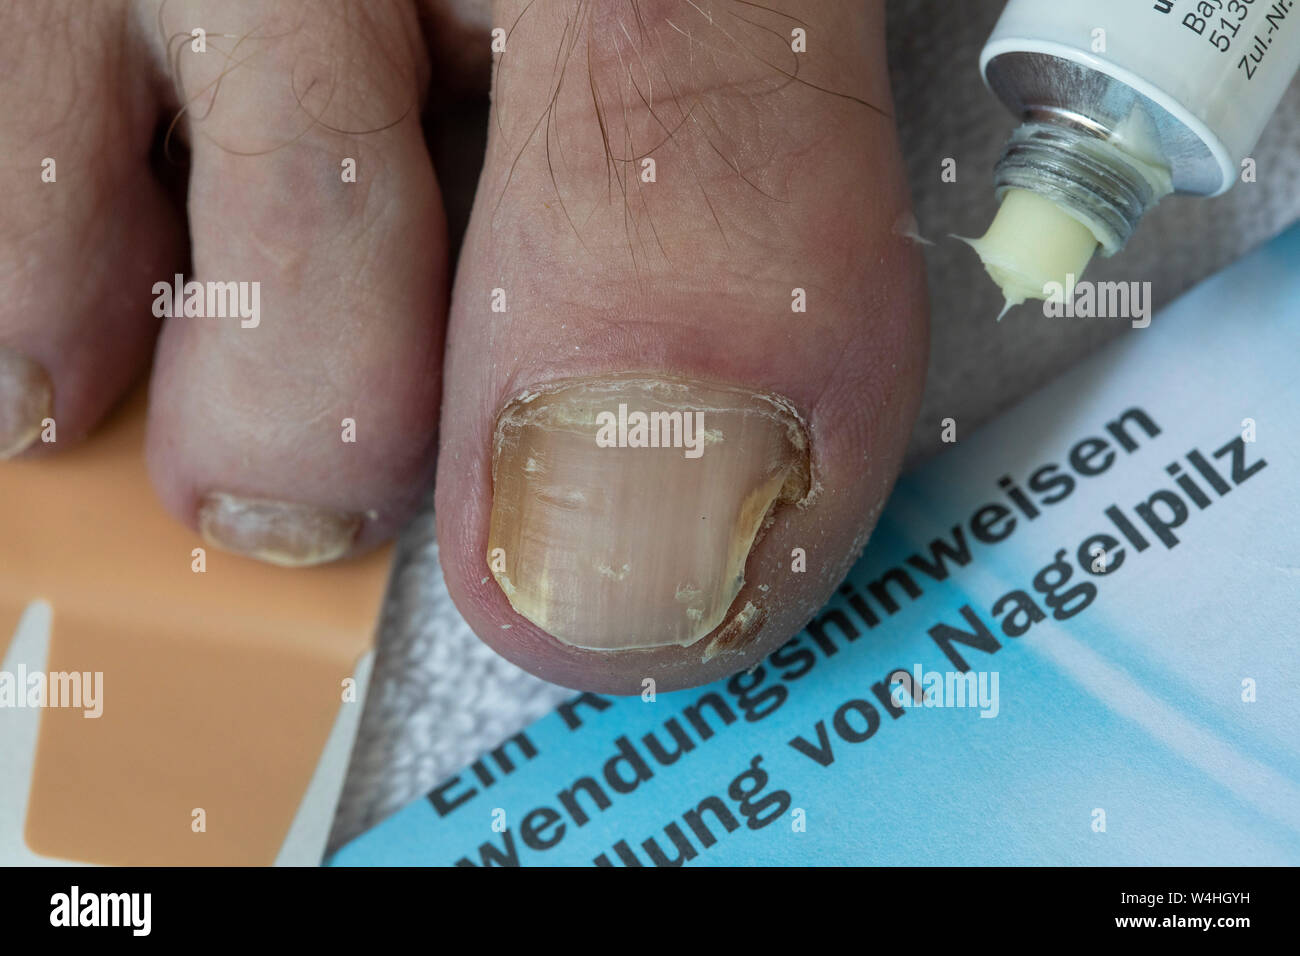 Efficacy of treatment with excimer phototherapy in nail dystrophy secondary  to lichen striatus. | European Journal of Pediatric Dermatology